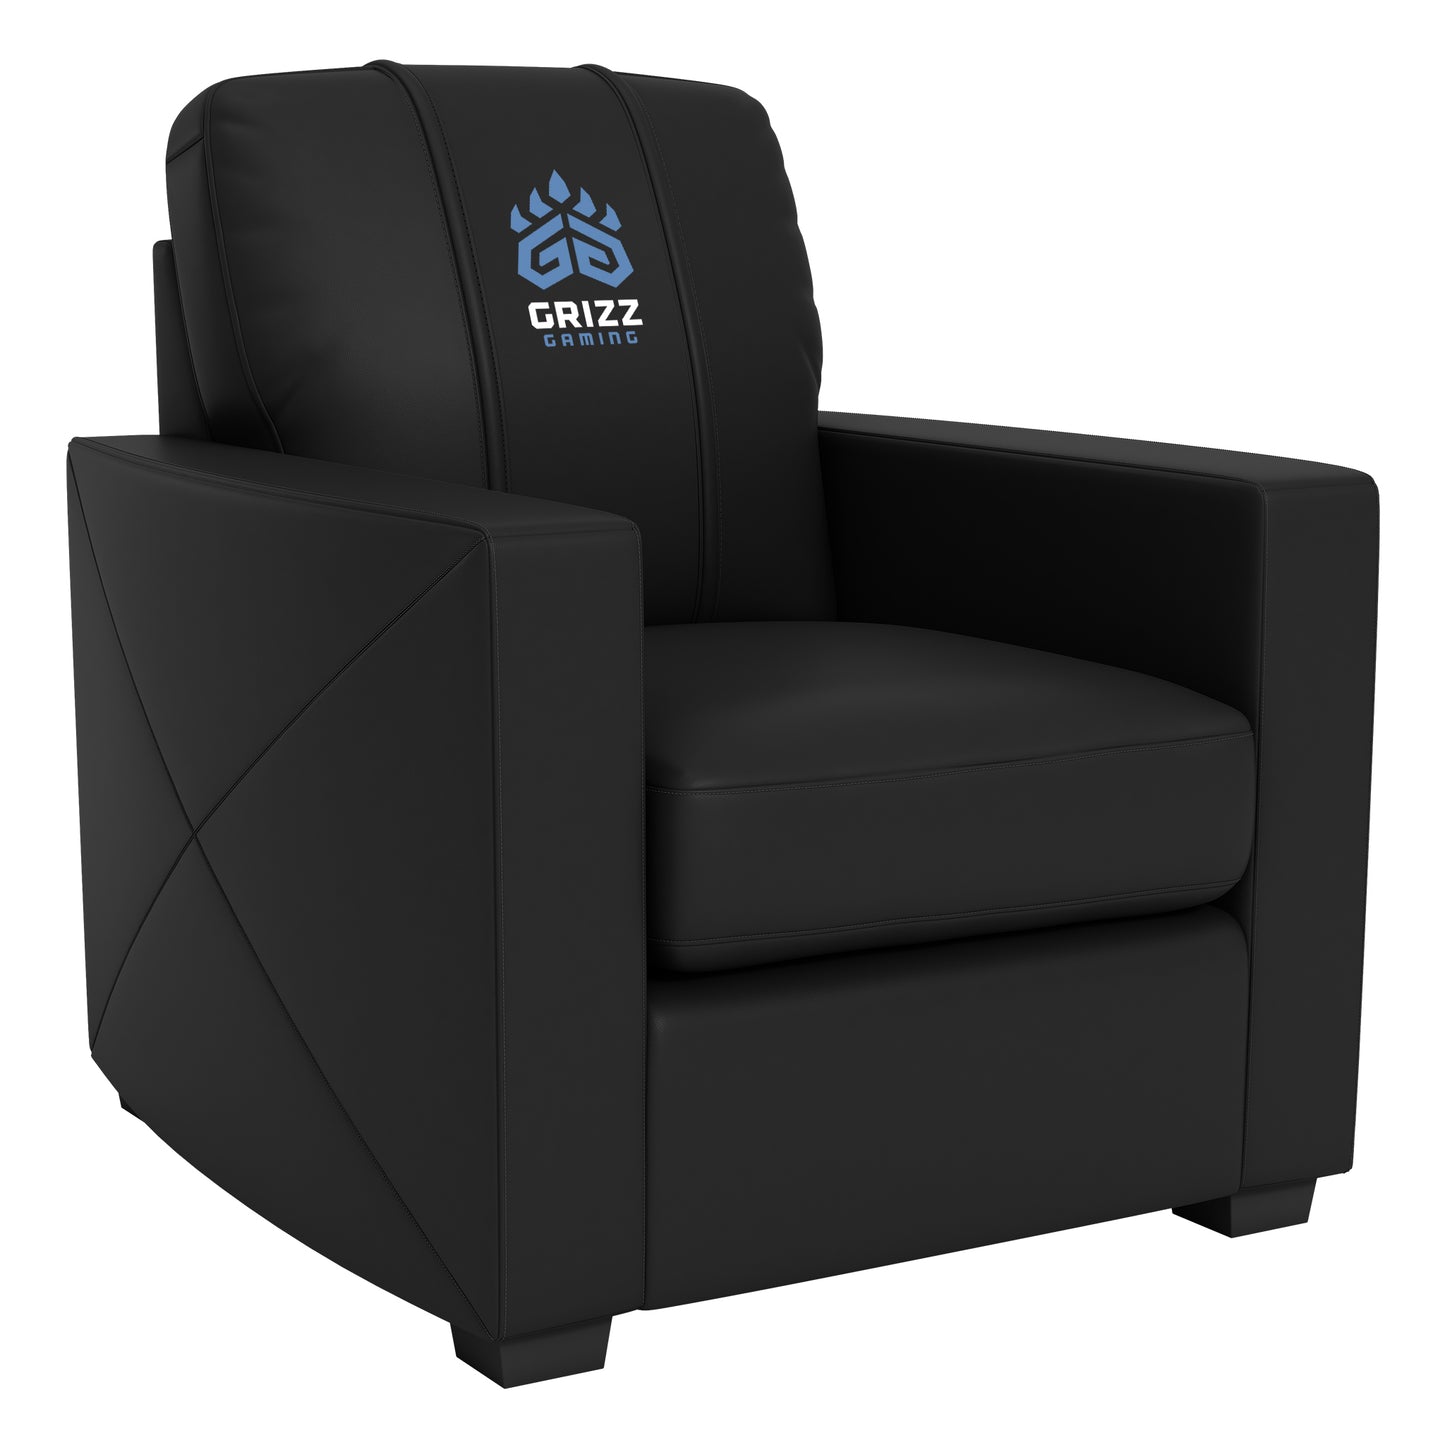 Silver Club Chair with Memphis Grizz Gaming Logo